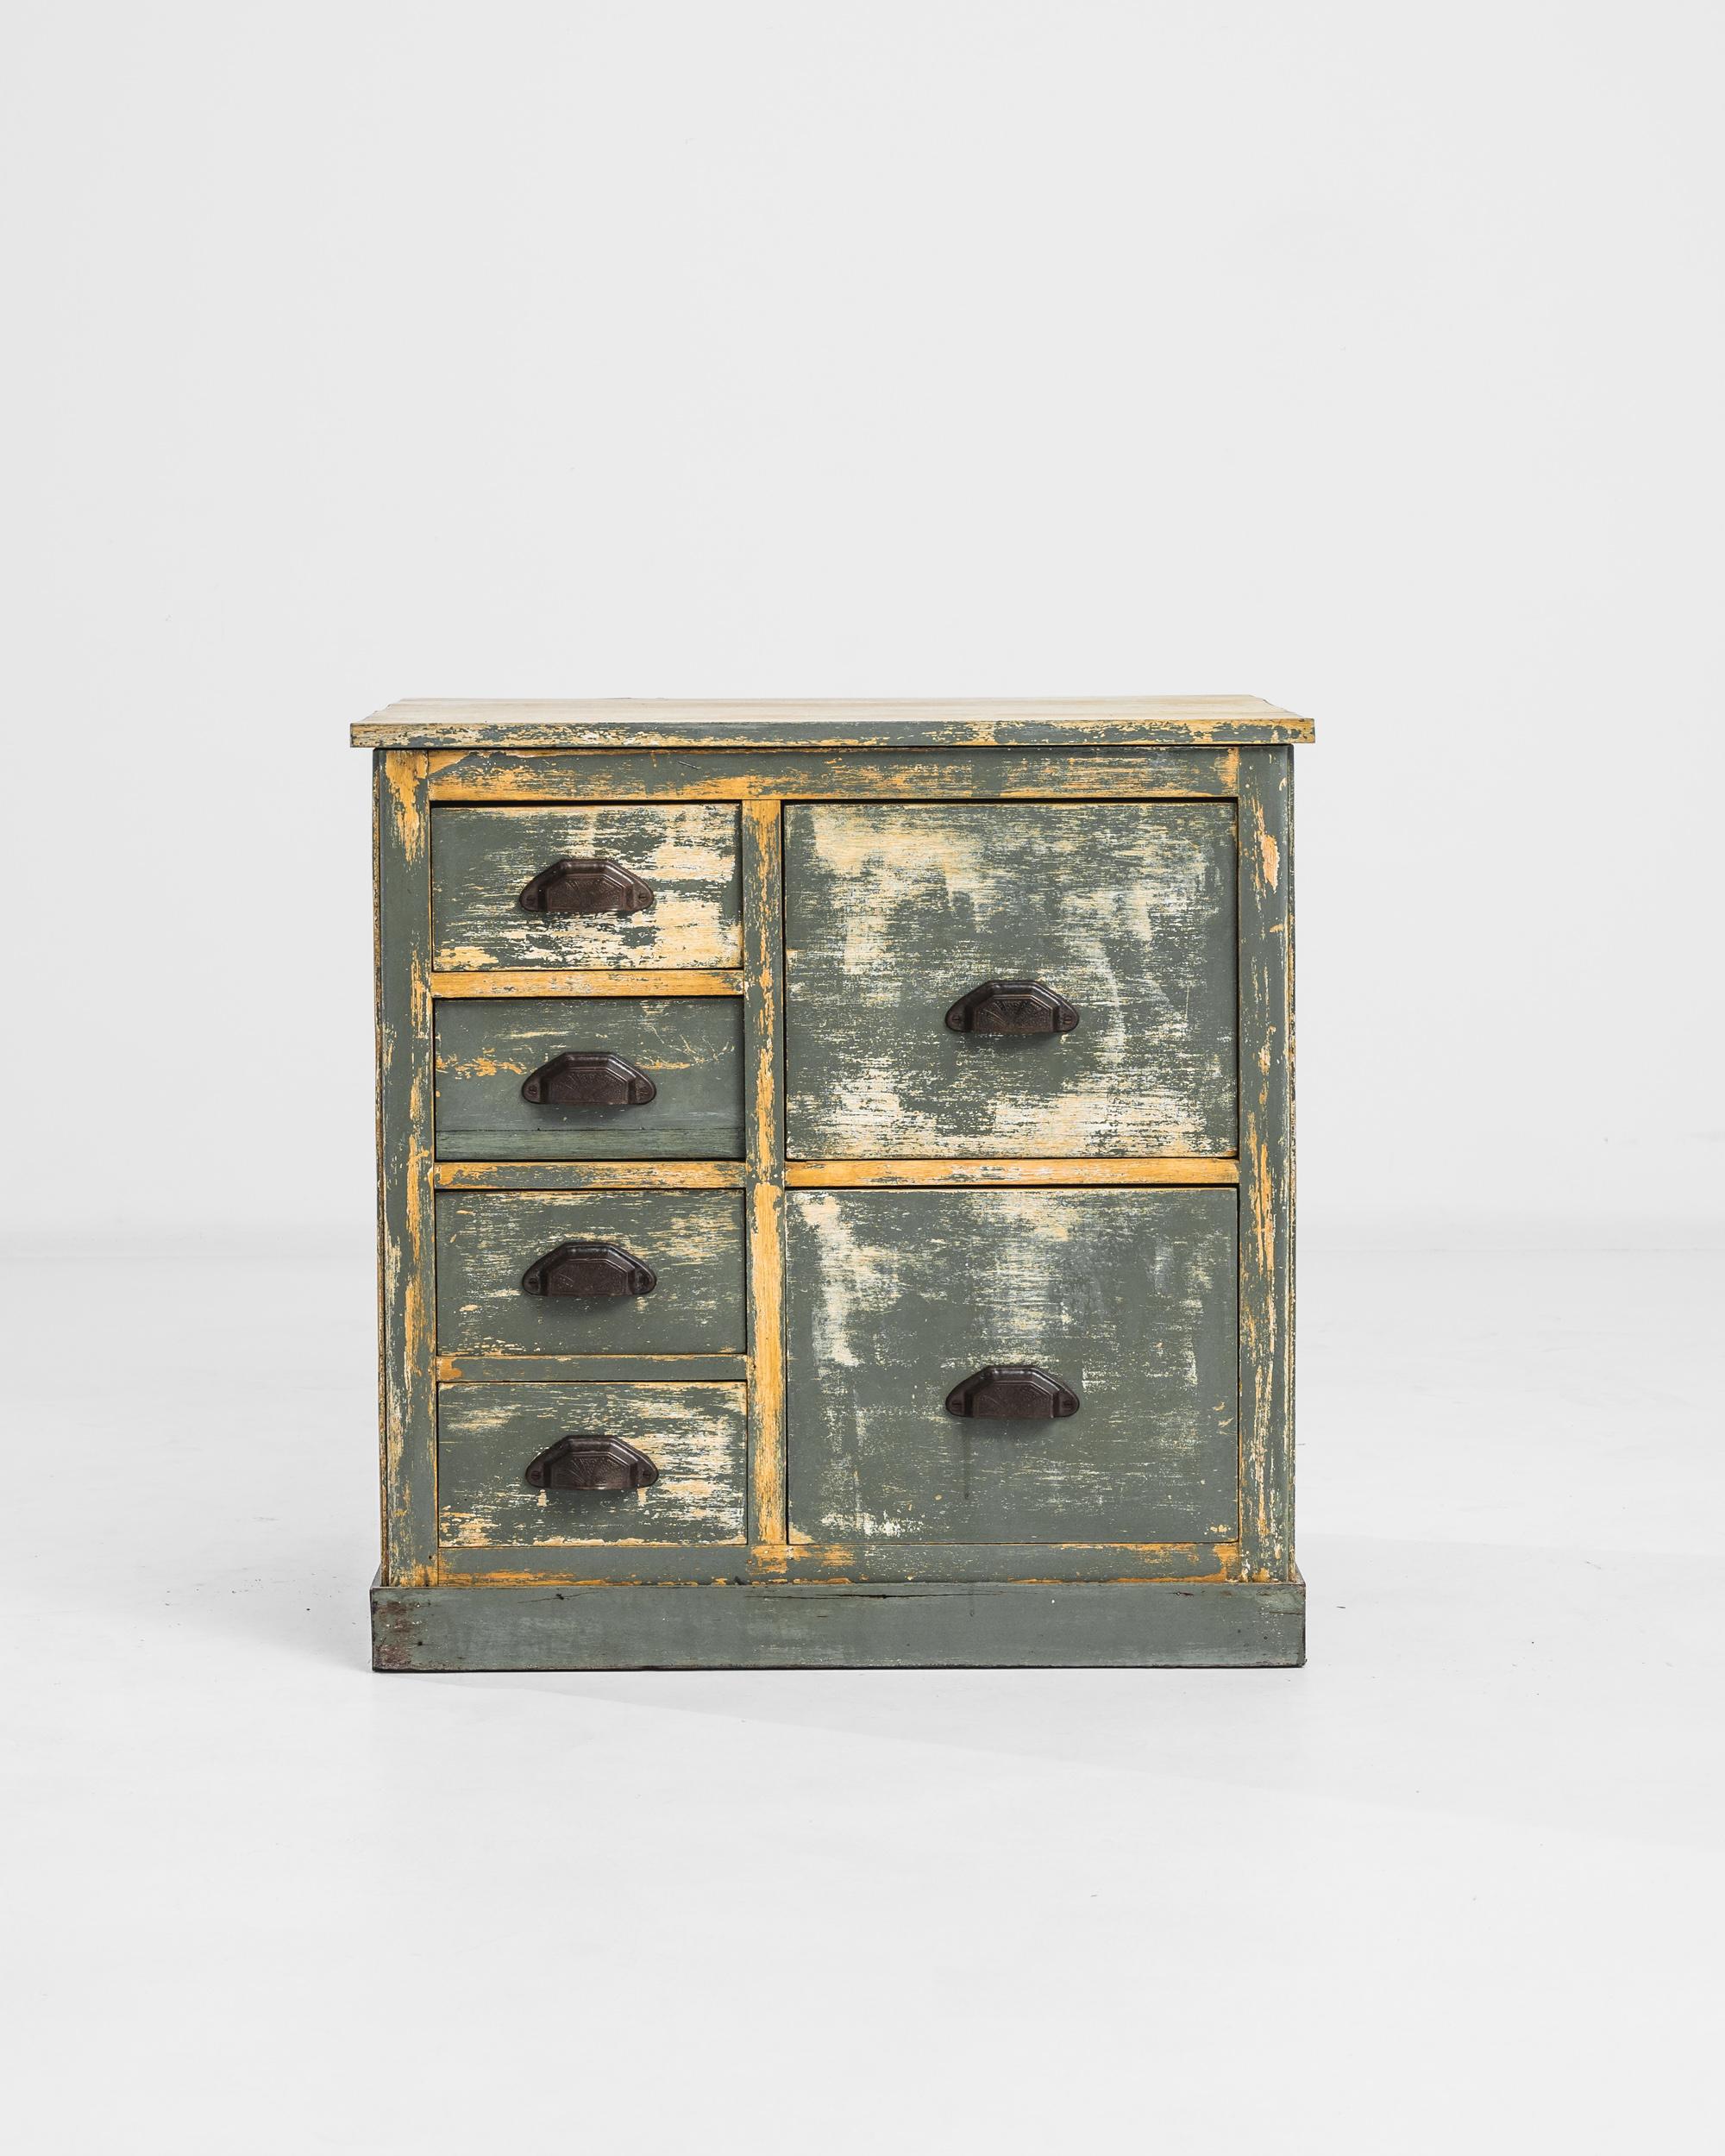 A dignified wooden chest of drawers with an attractive distressed finish. This vintage piece was built in 1940s France: deep, filing cabinet style drawers speak to a practical disposition, while ornate metal cup pulls, embossed with a pattern